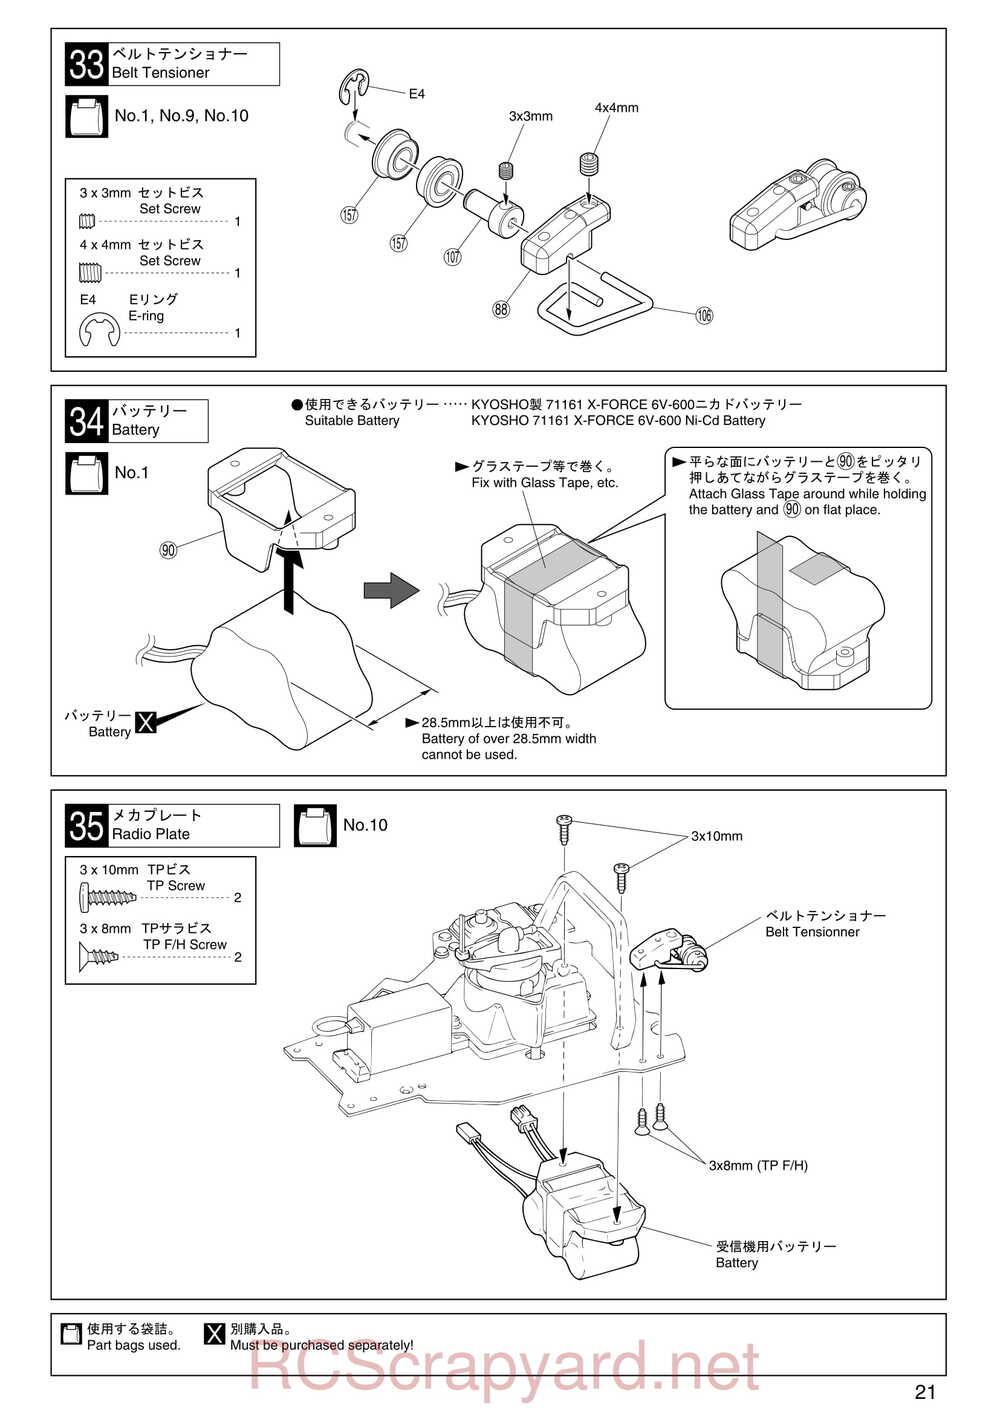 Kyosho - 31102 - V-One RR - Manual - Page 21